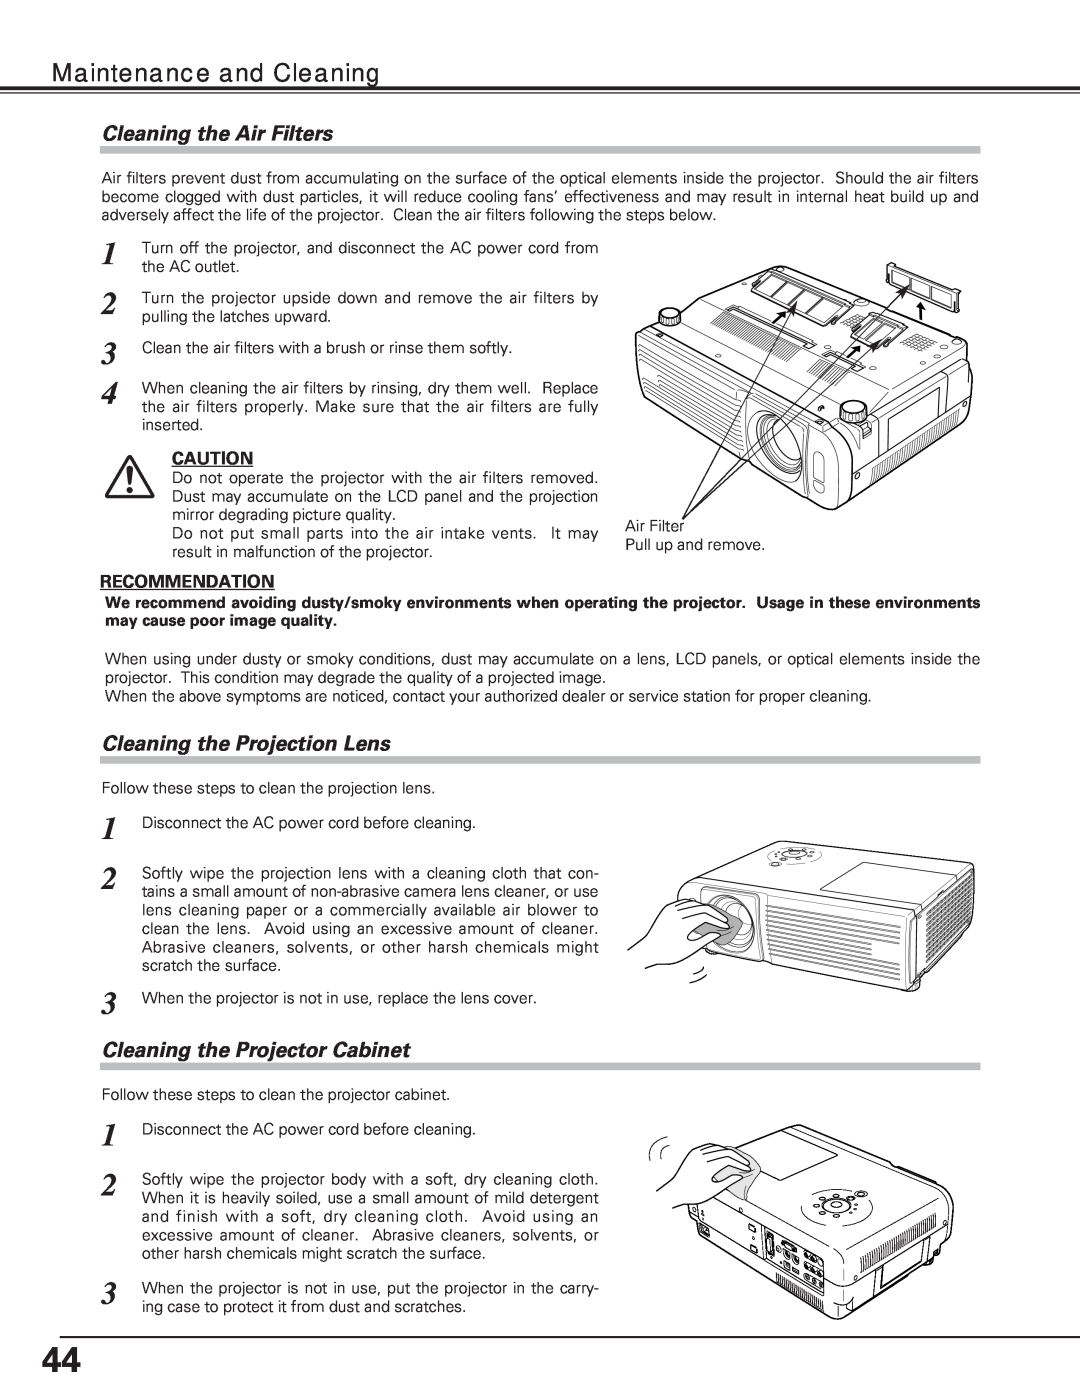 Eiki LC-XE10 instruction manual Maintenance and Cleaning, Cleaning the Air Filters, Cleaning the Projection Lens 